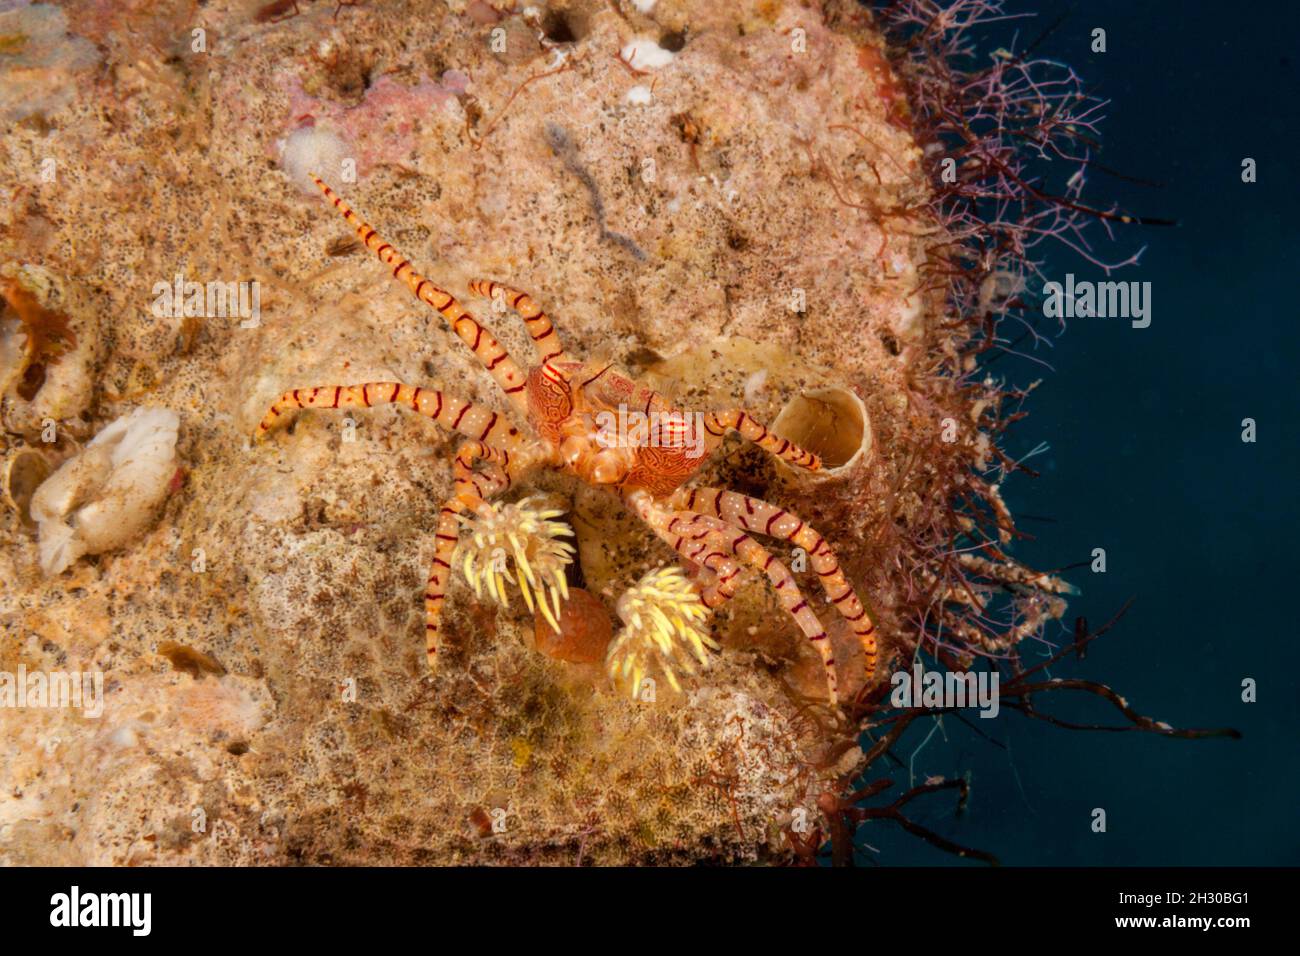 The endemic Hawaiian pom-pom crab or boxer crab, Lybia edmondsoni, is associated with anemones, Triactis sp, that it carries around holding with the c Stock Photo